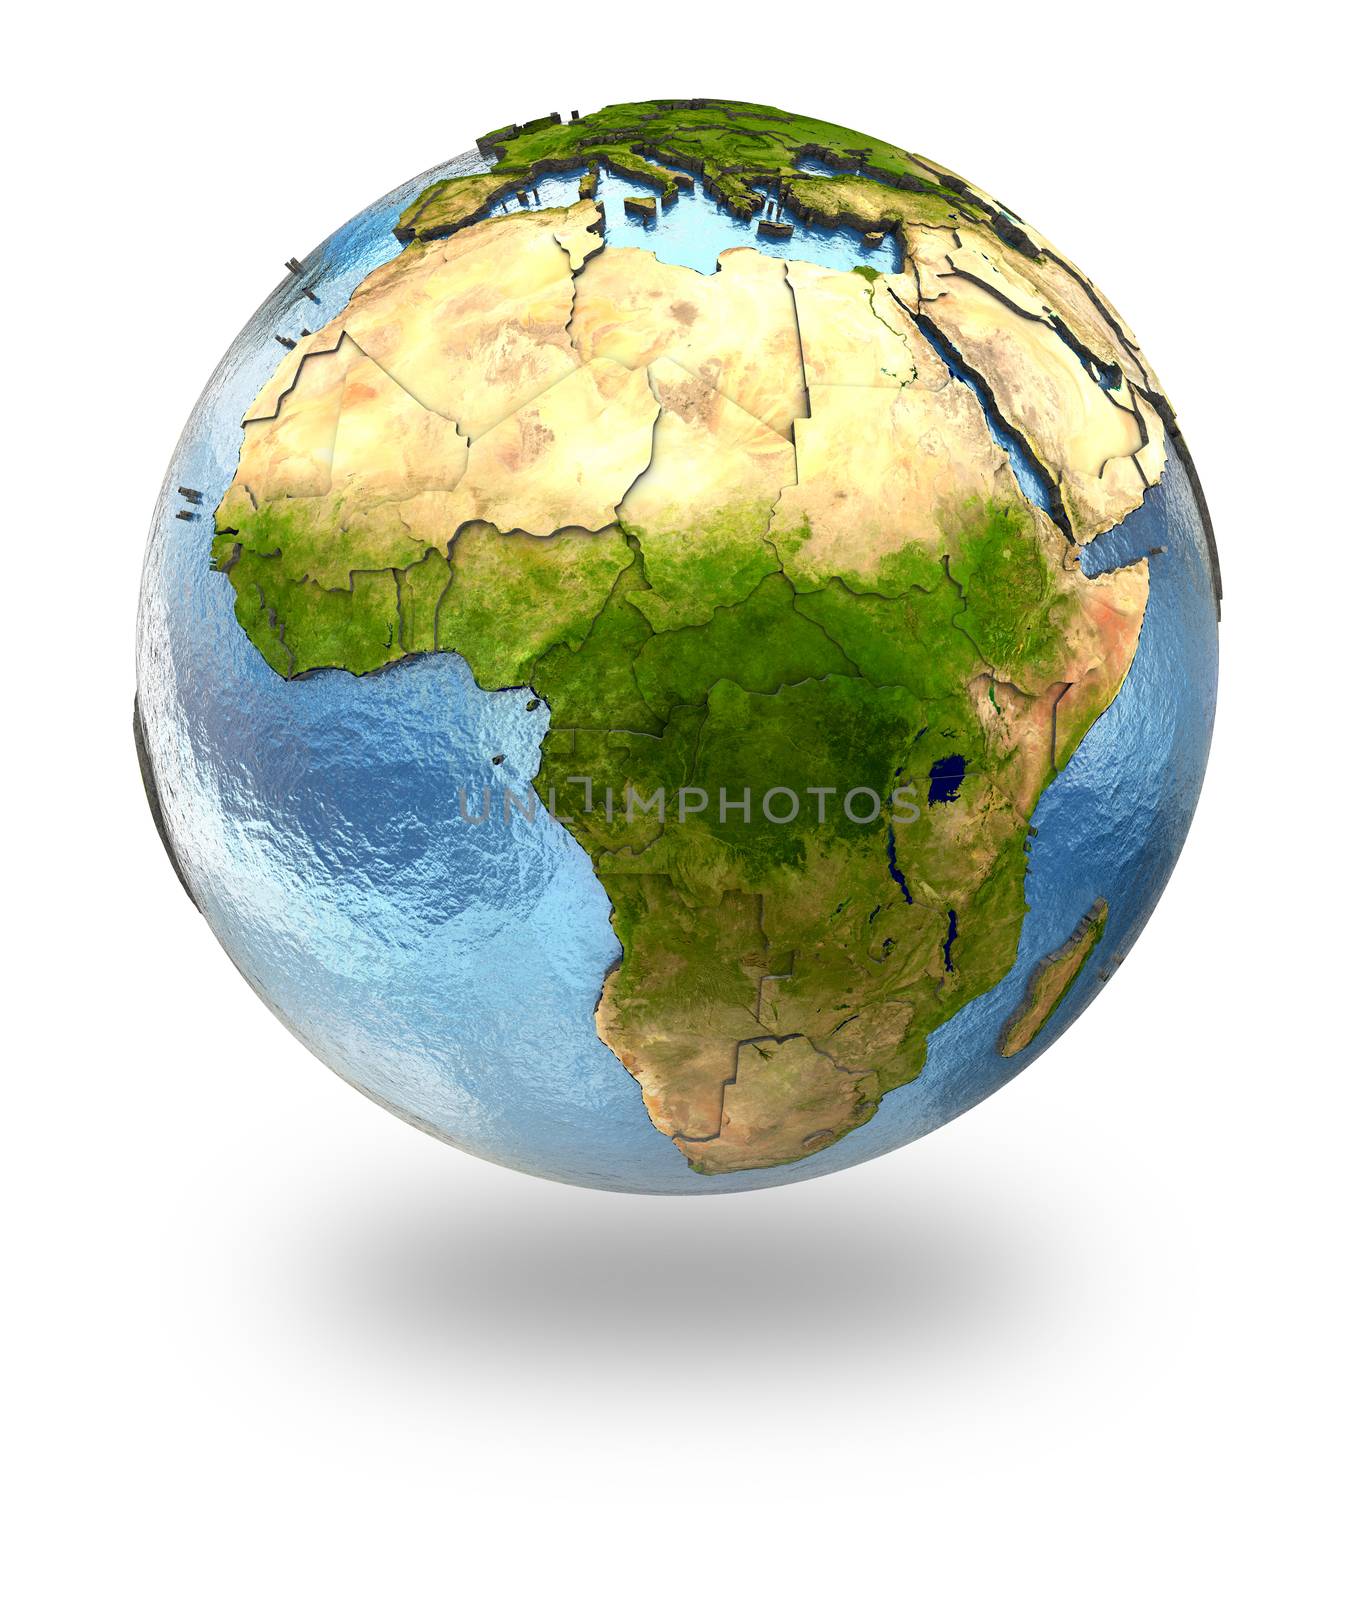 Africa on Earth by Harvepino